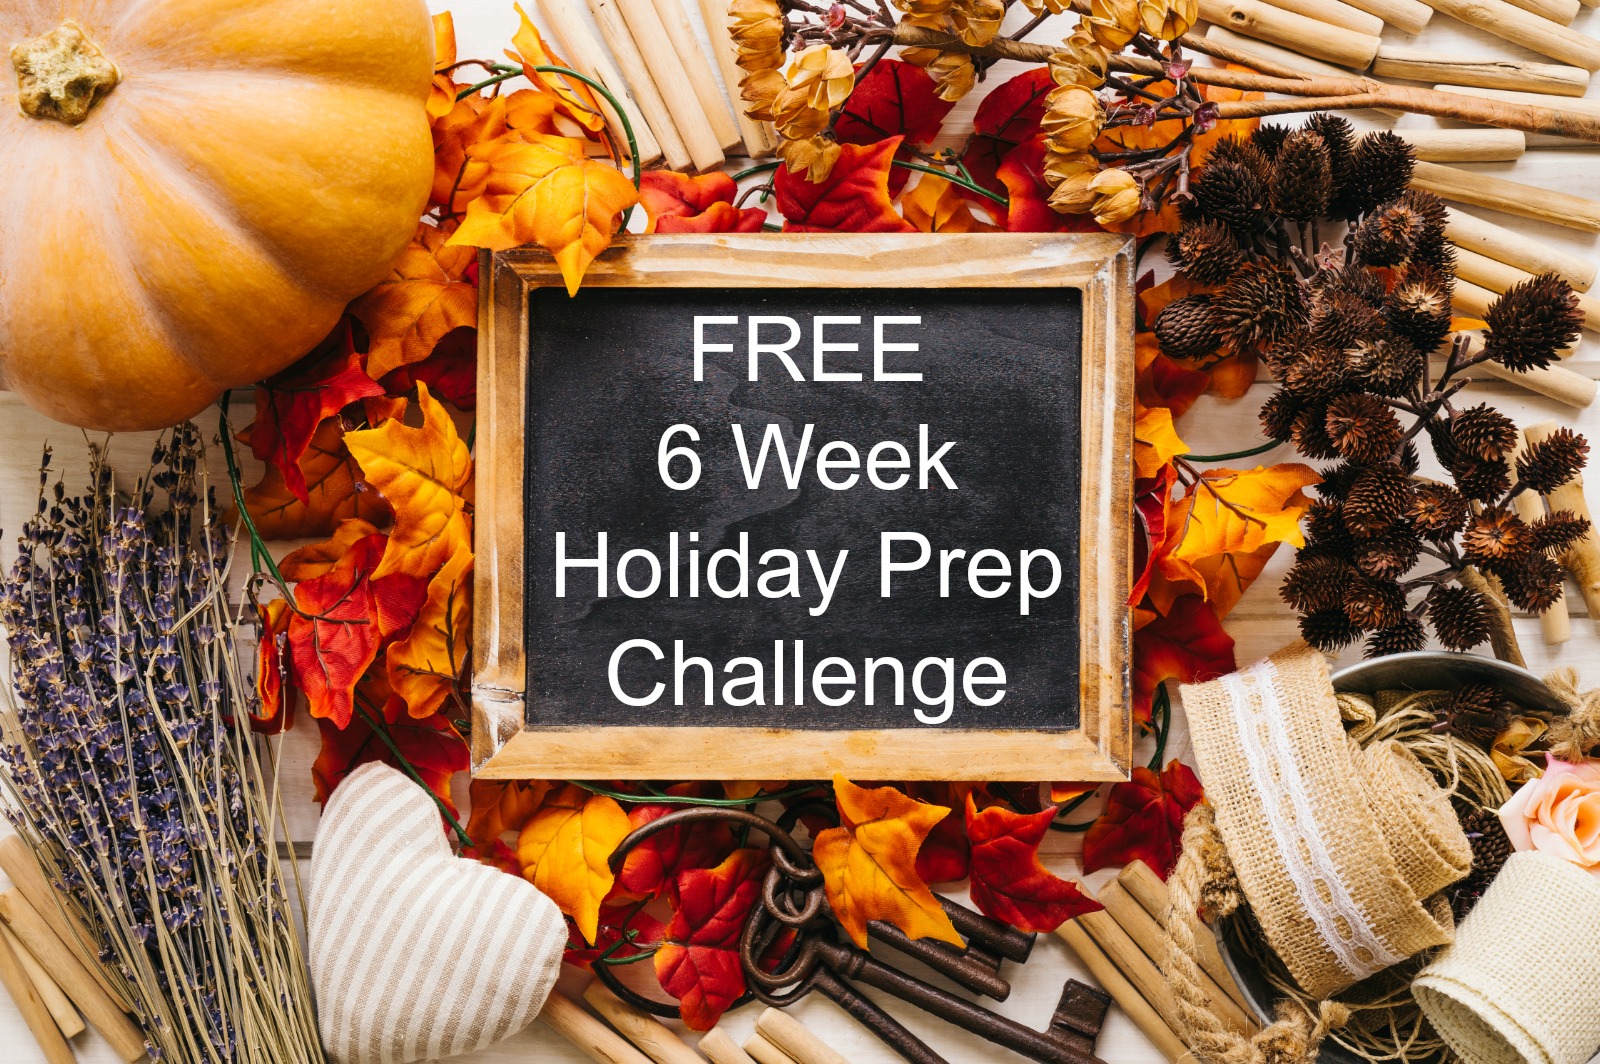 Holidays can be stressful, but they don't have to be! Sign up for my FREE 6 Week Holiday Prep Challenge to take the stress out of the holidays!